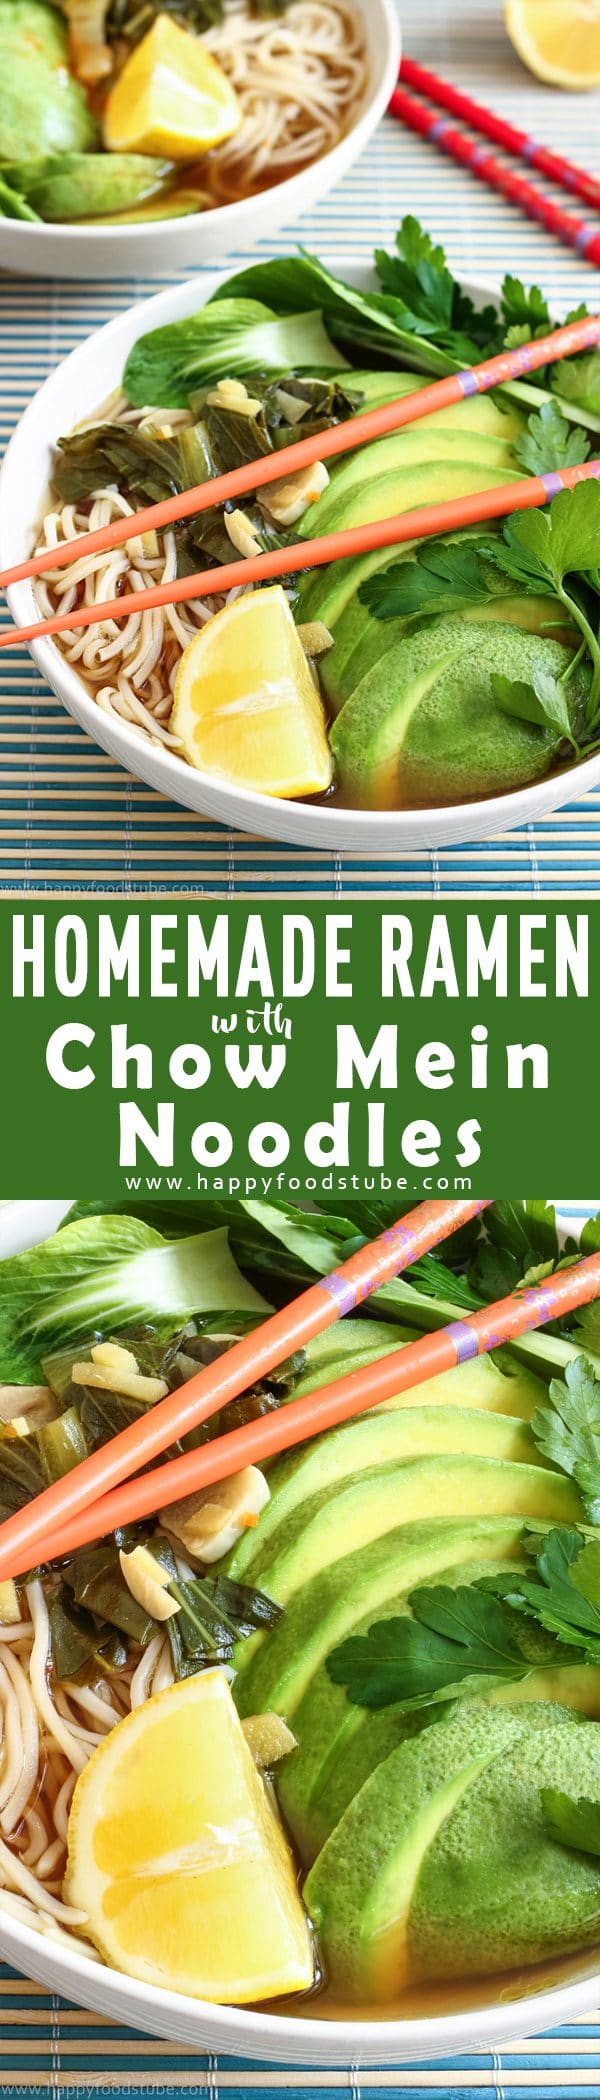 Homemade Ramen with Chow Mein Noodles Recipe Picture